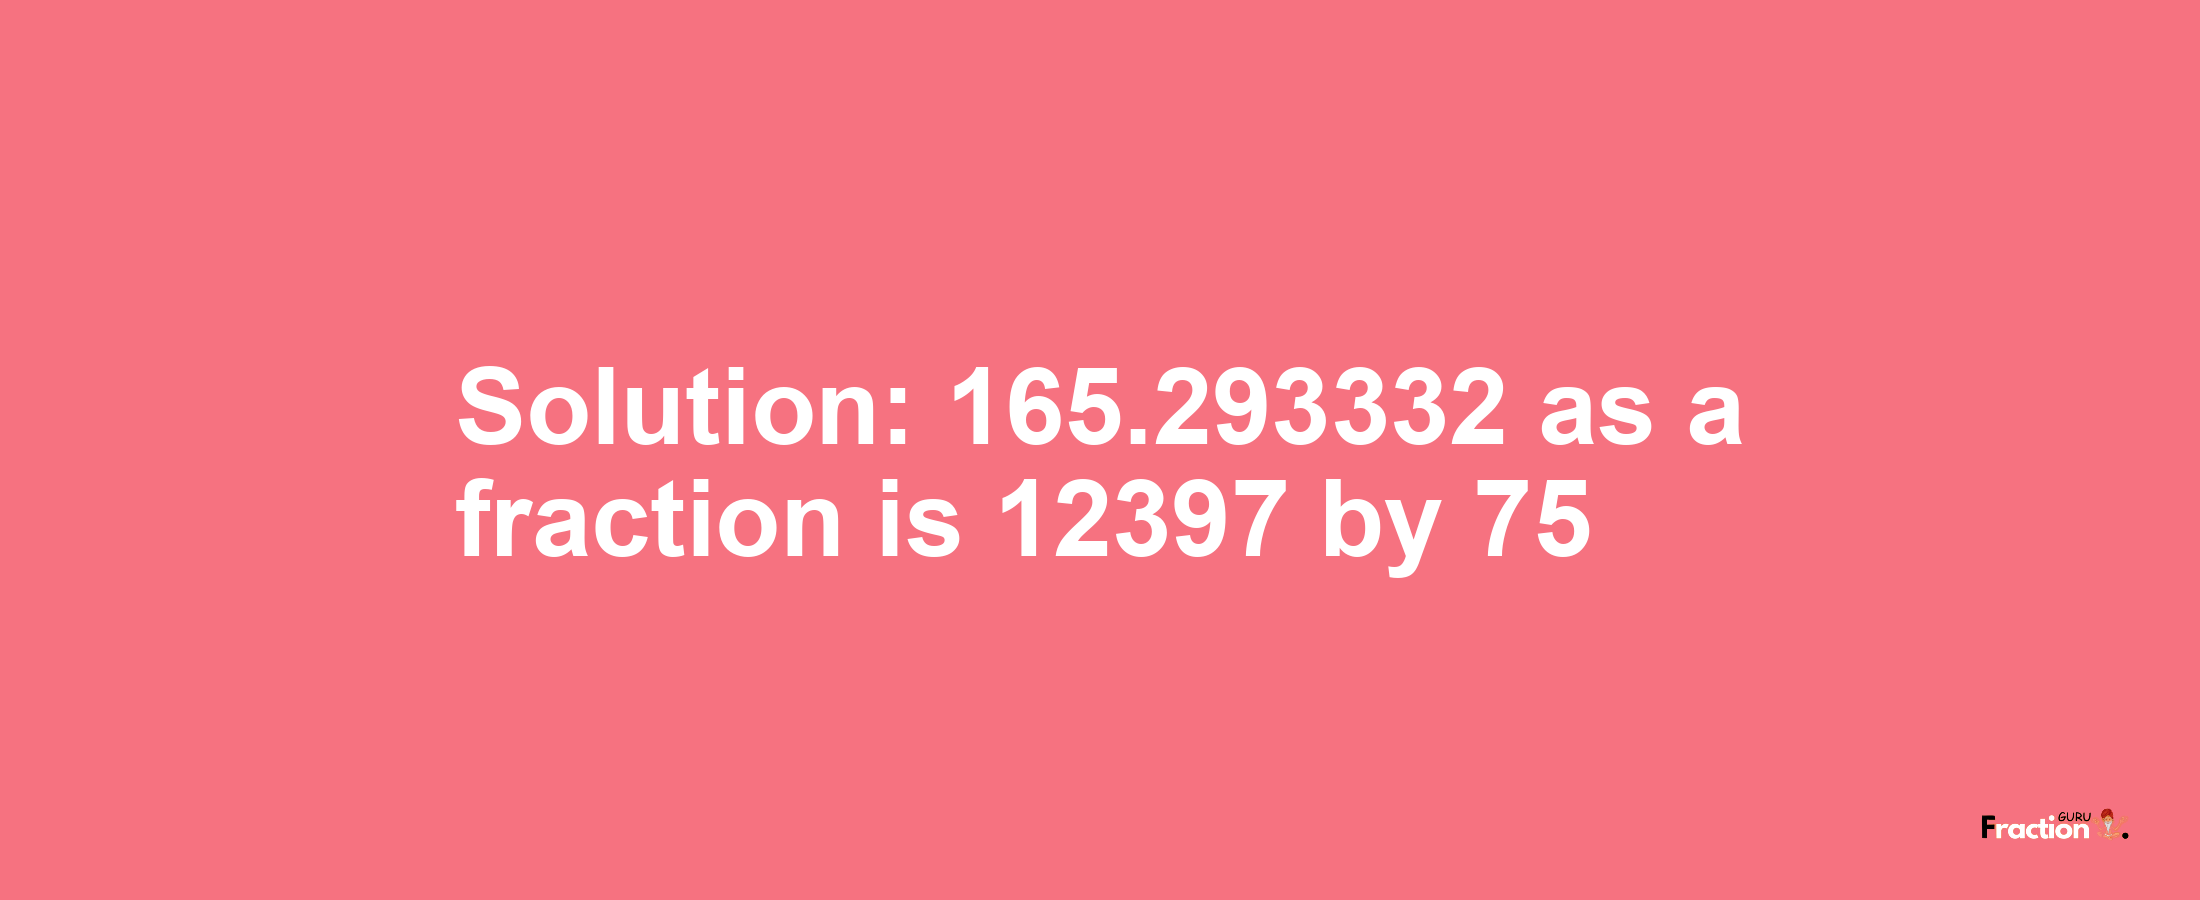 Solution:165.293332 as a fraction is 12397/75